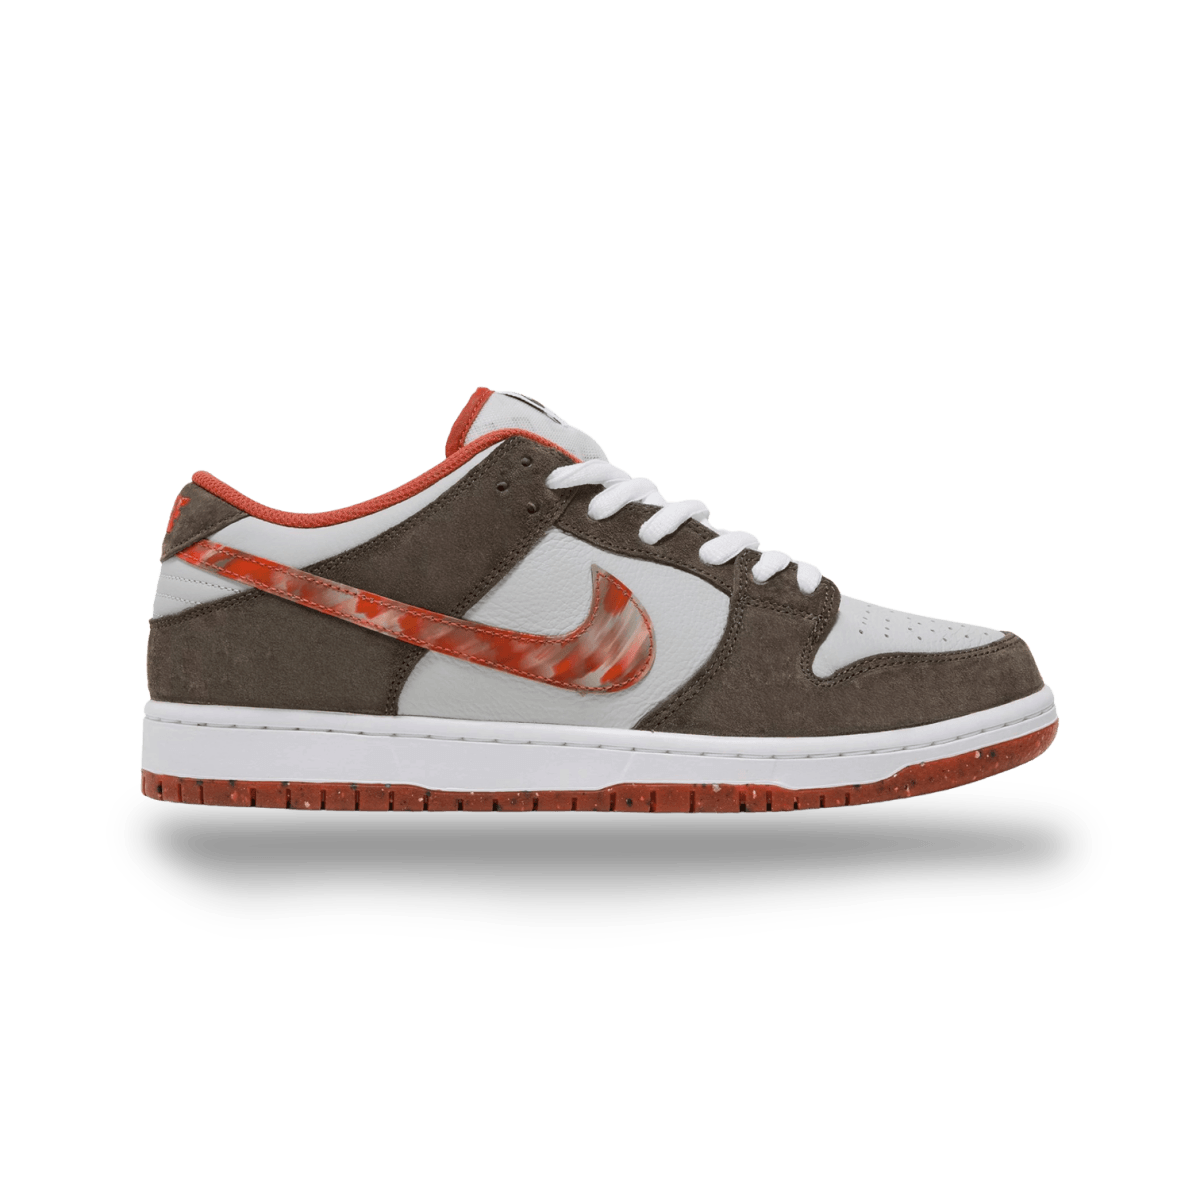 SB Dunk Low x Crushed D.C. 'Golden Hour' - Low Sneaker - Dunks - Jawns on Fire